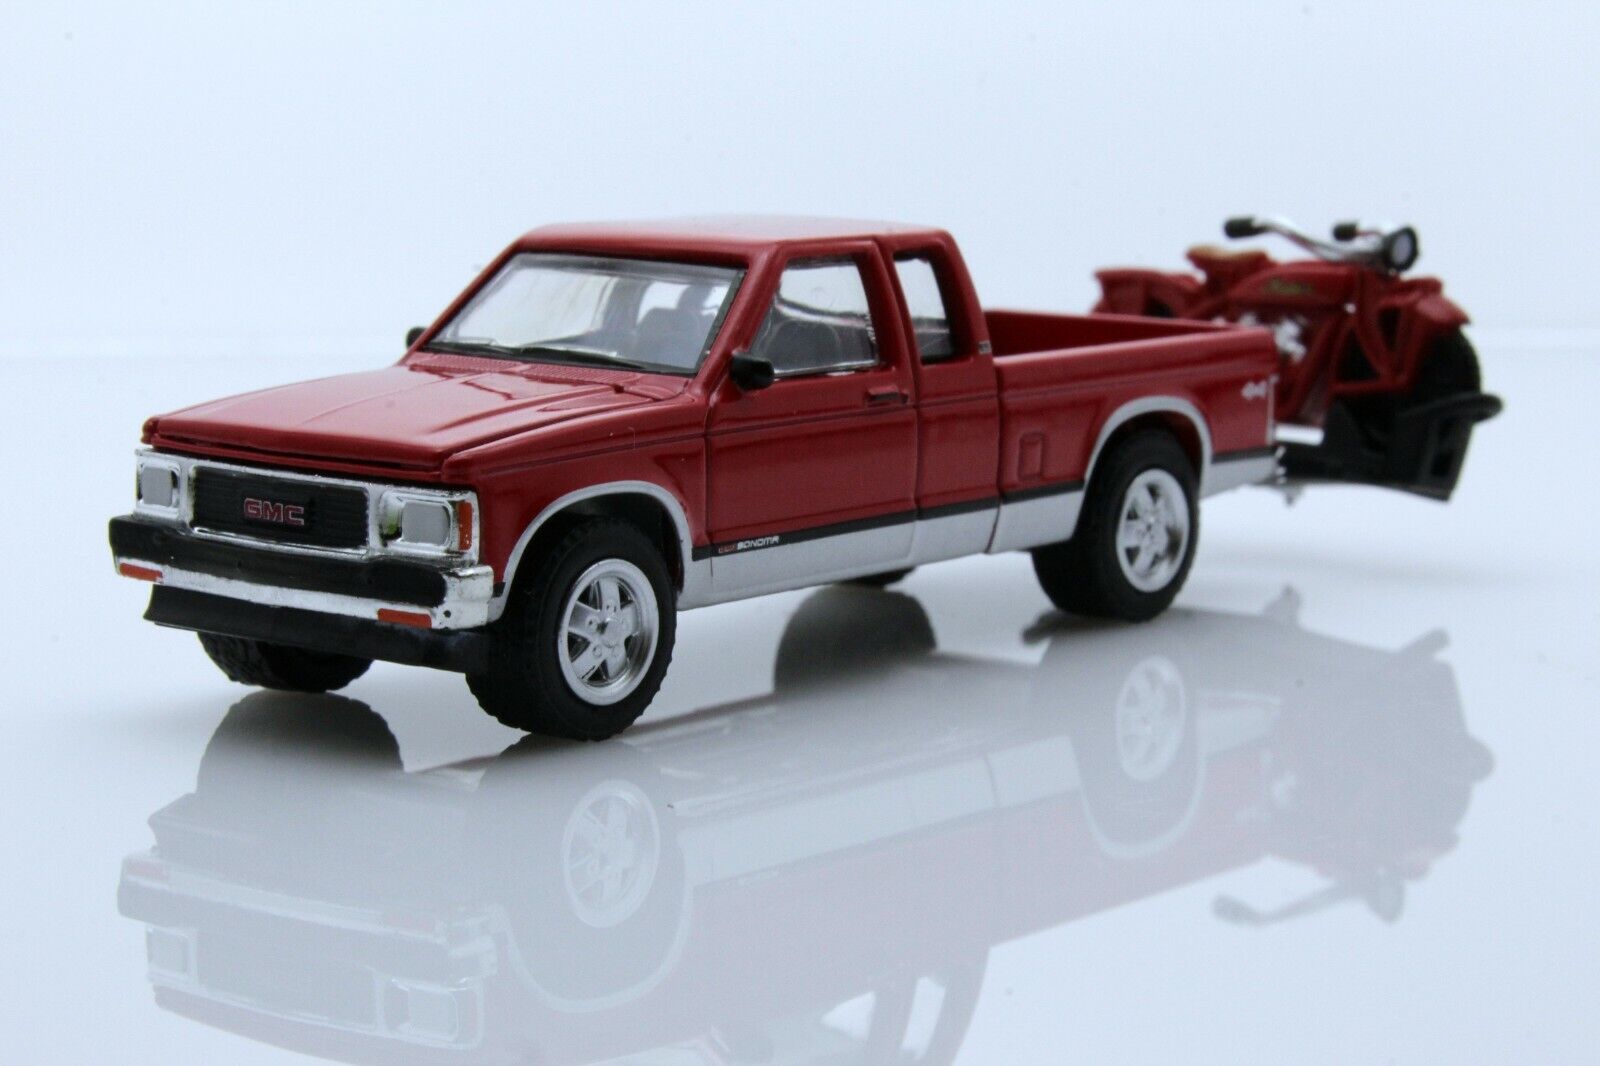 1991 GMC Sonoma & Indian Scout Motorcycle w/ Hitch Tray 1:64 Diecast Model, S10